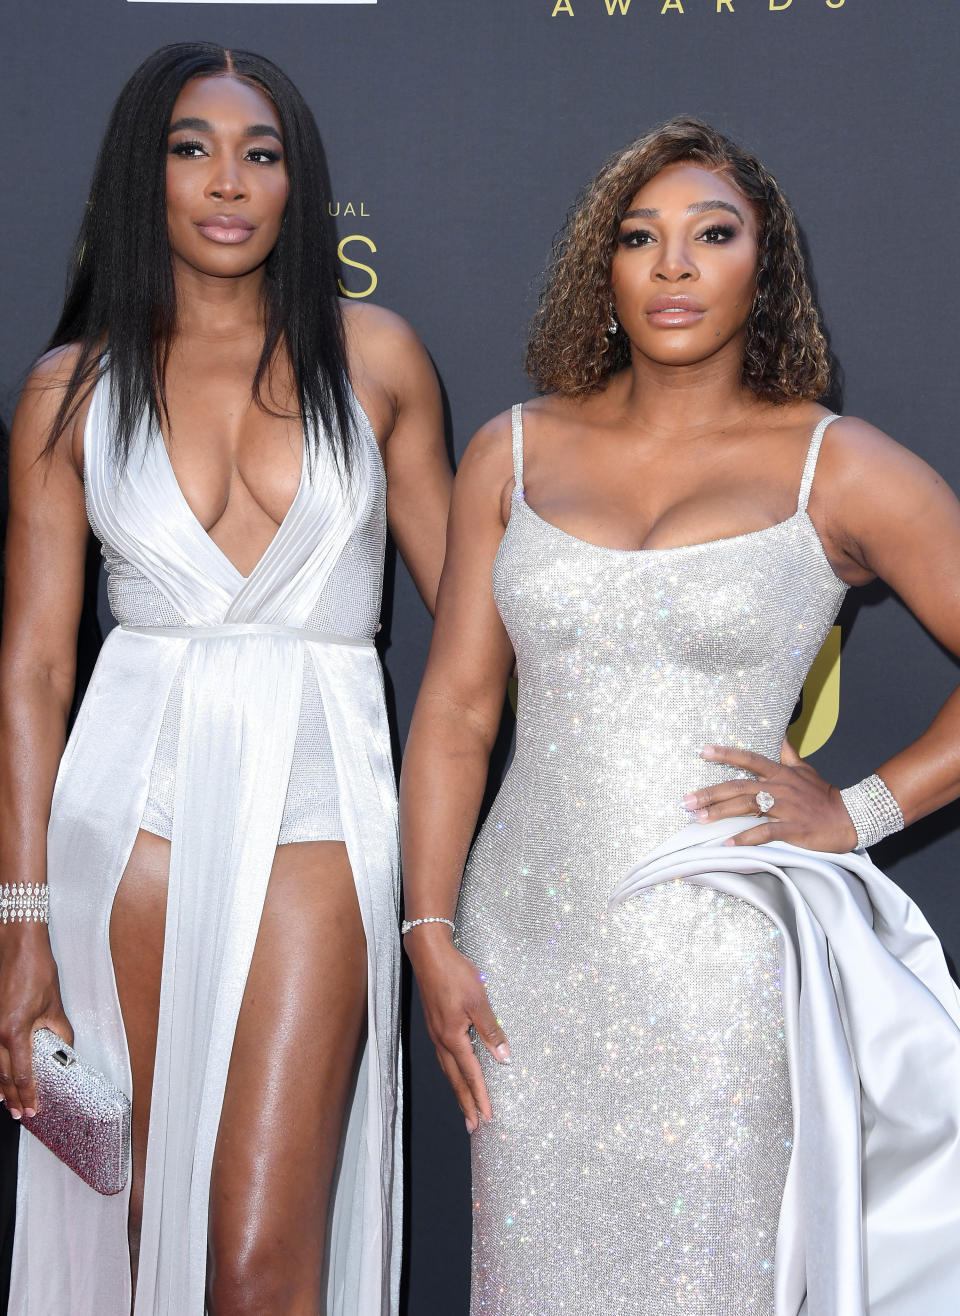 Venus and Serena Williams on the red carpet